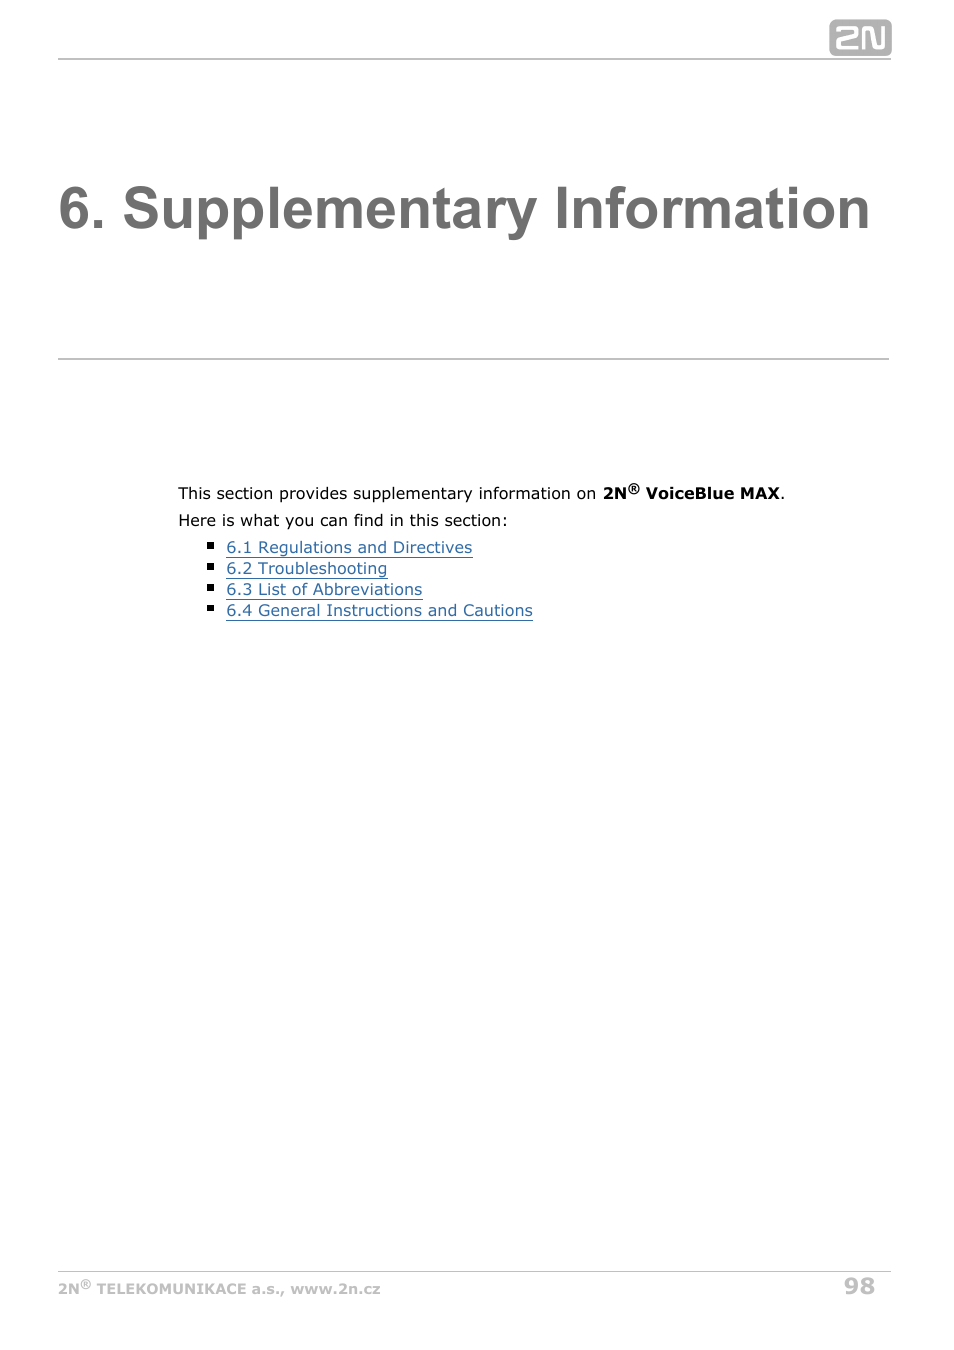 Supplementary information | 2N VoiceBlue MAX v1.1 User Manual | Page 98 / 104